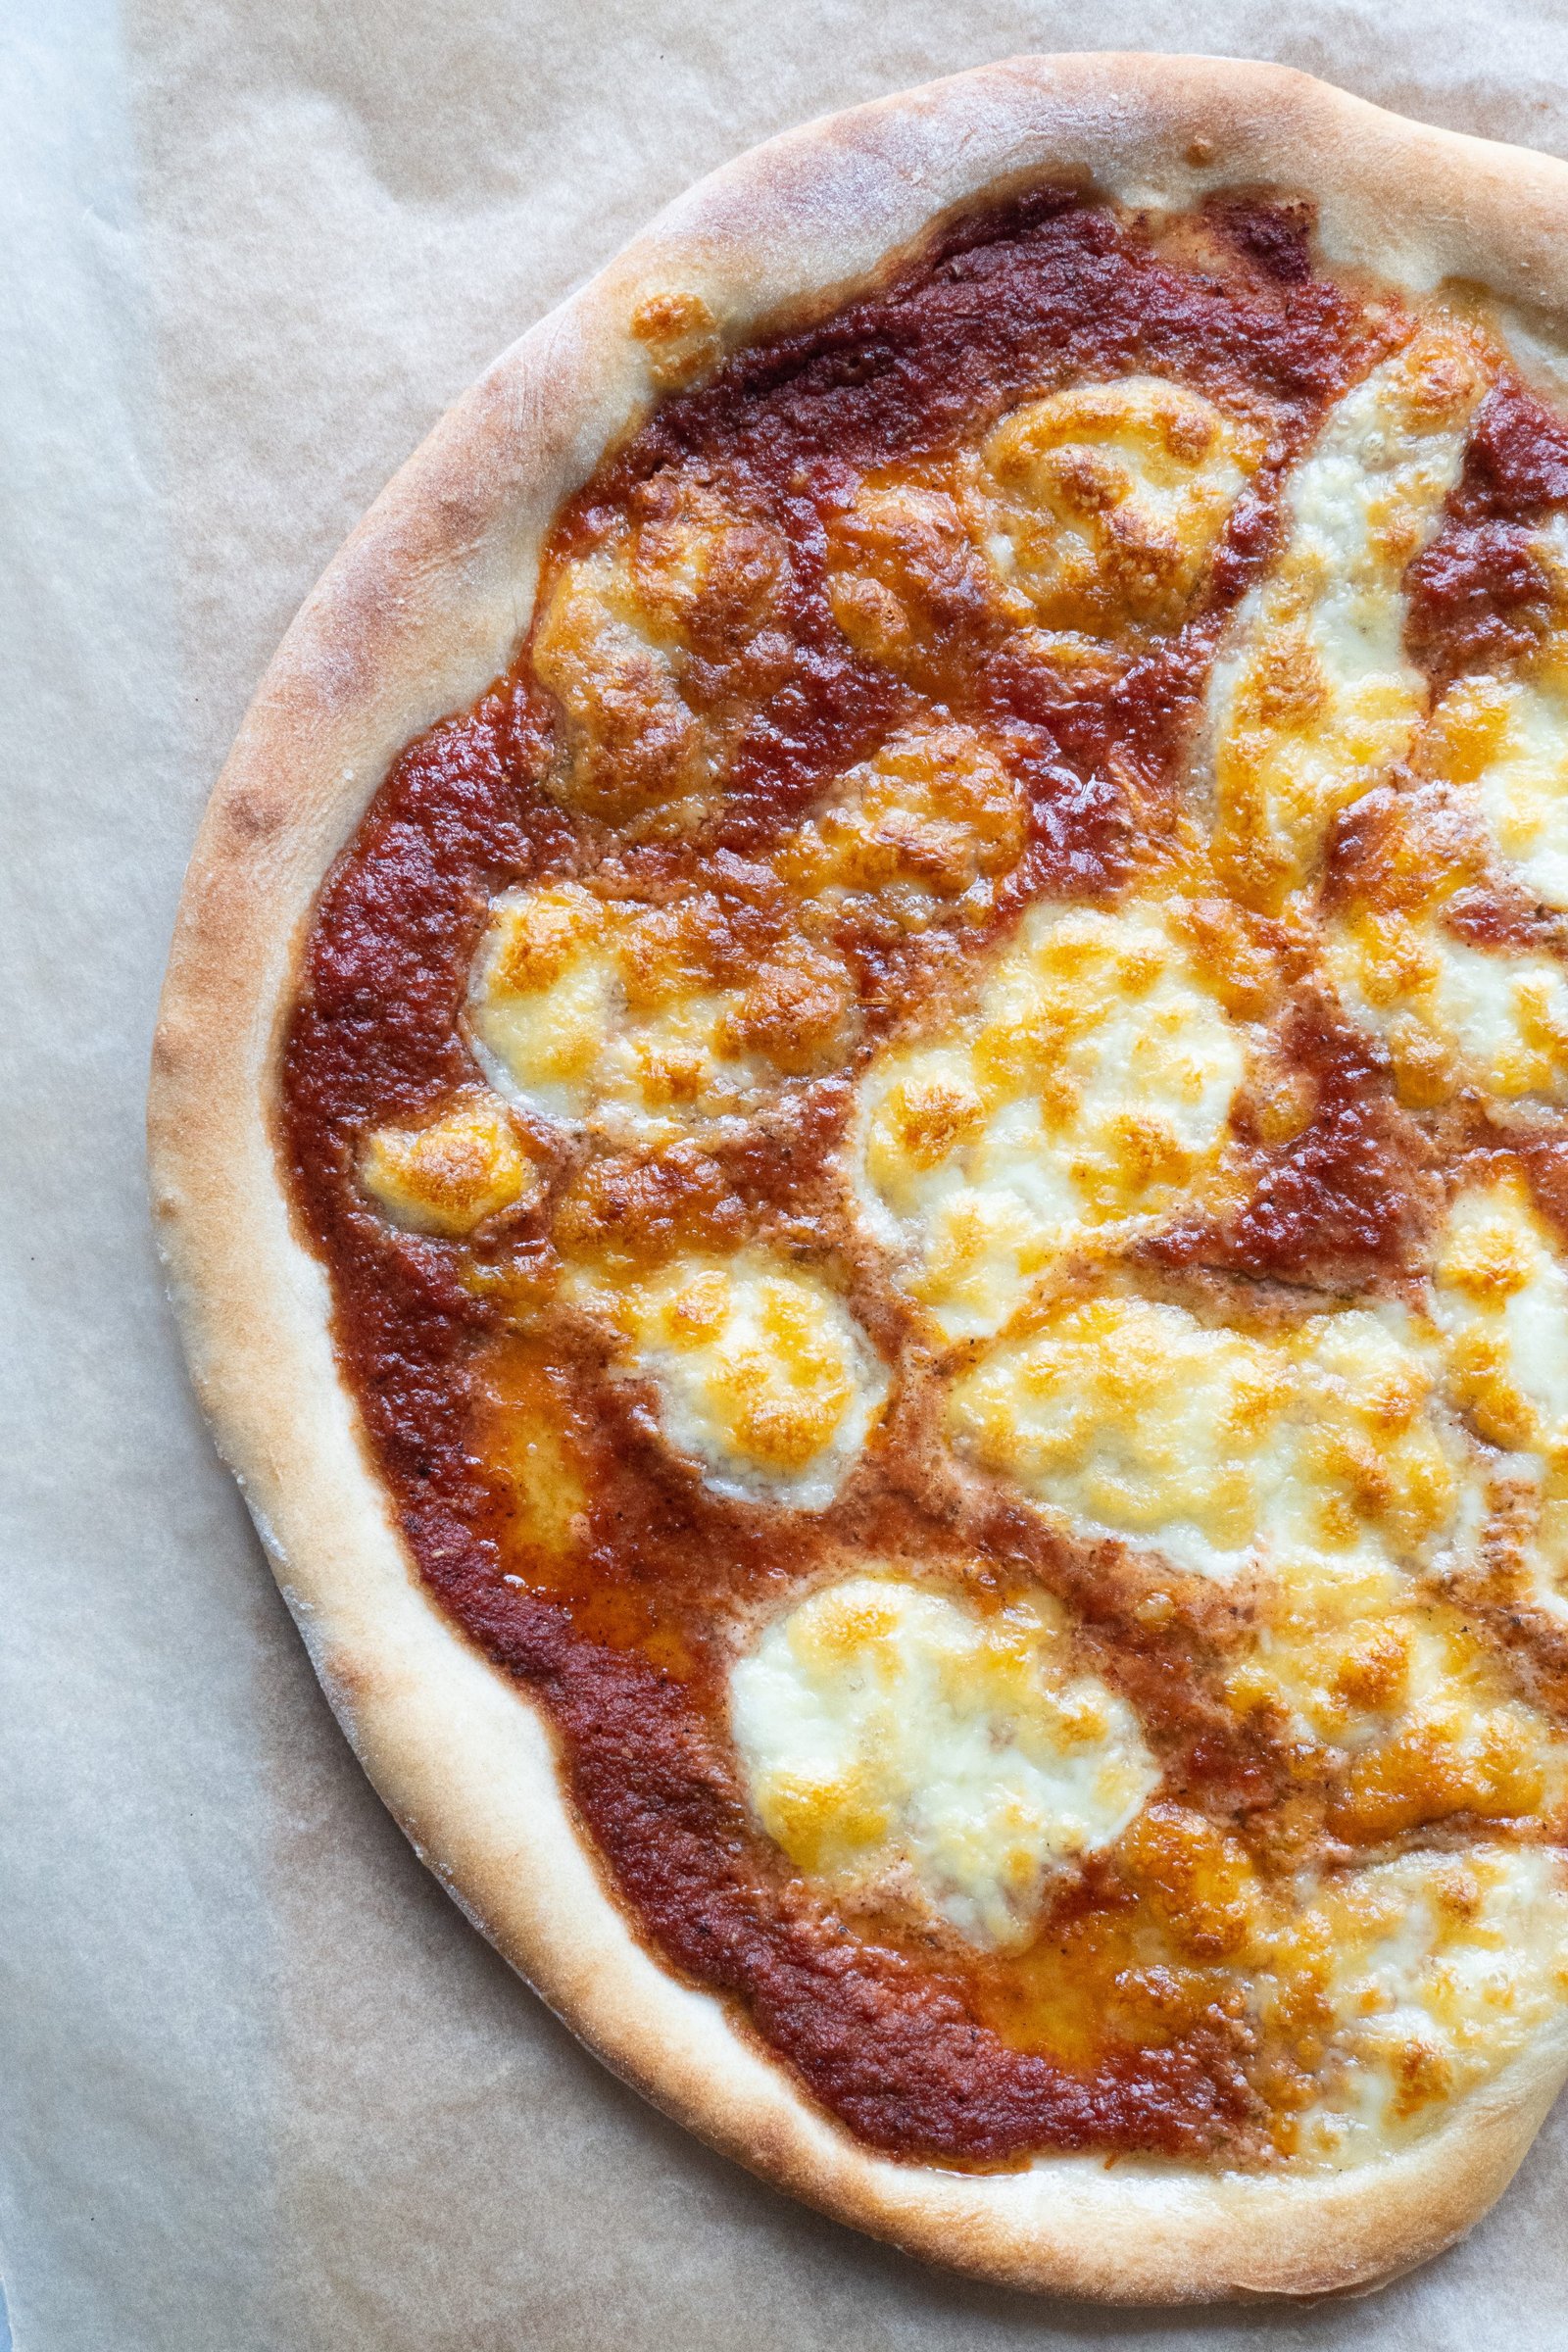 A golden brown pizza crust with the ideal texture, crispy on the outside and tender on the inside, the hallmark of a perfect homemade Italian pizza dough.